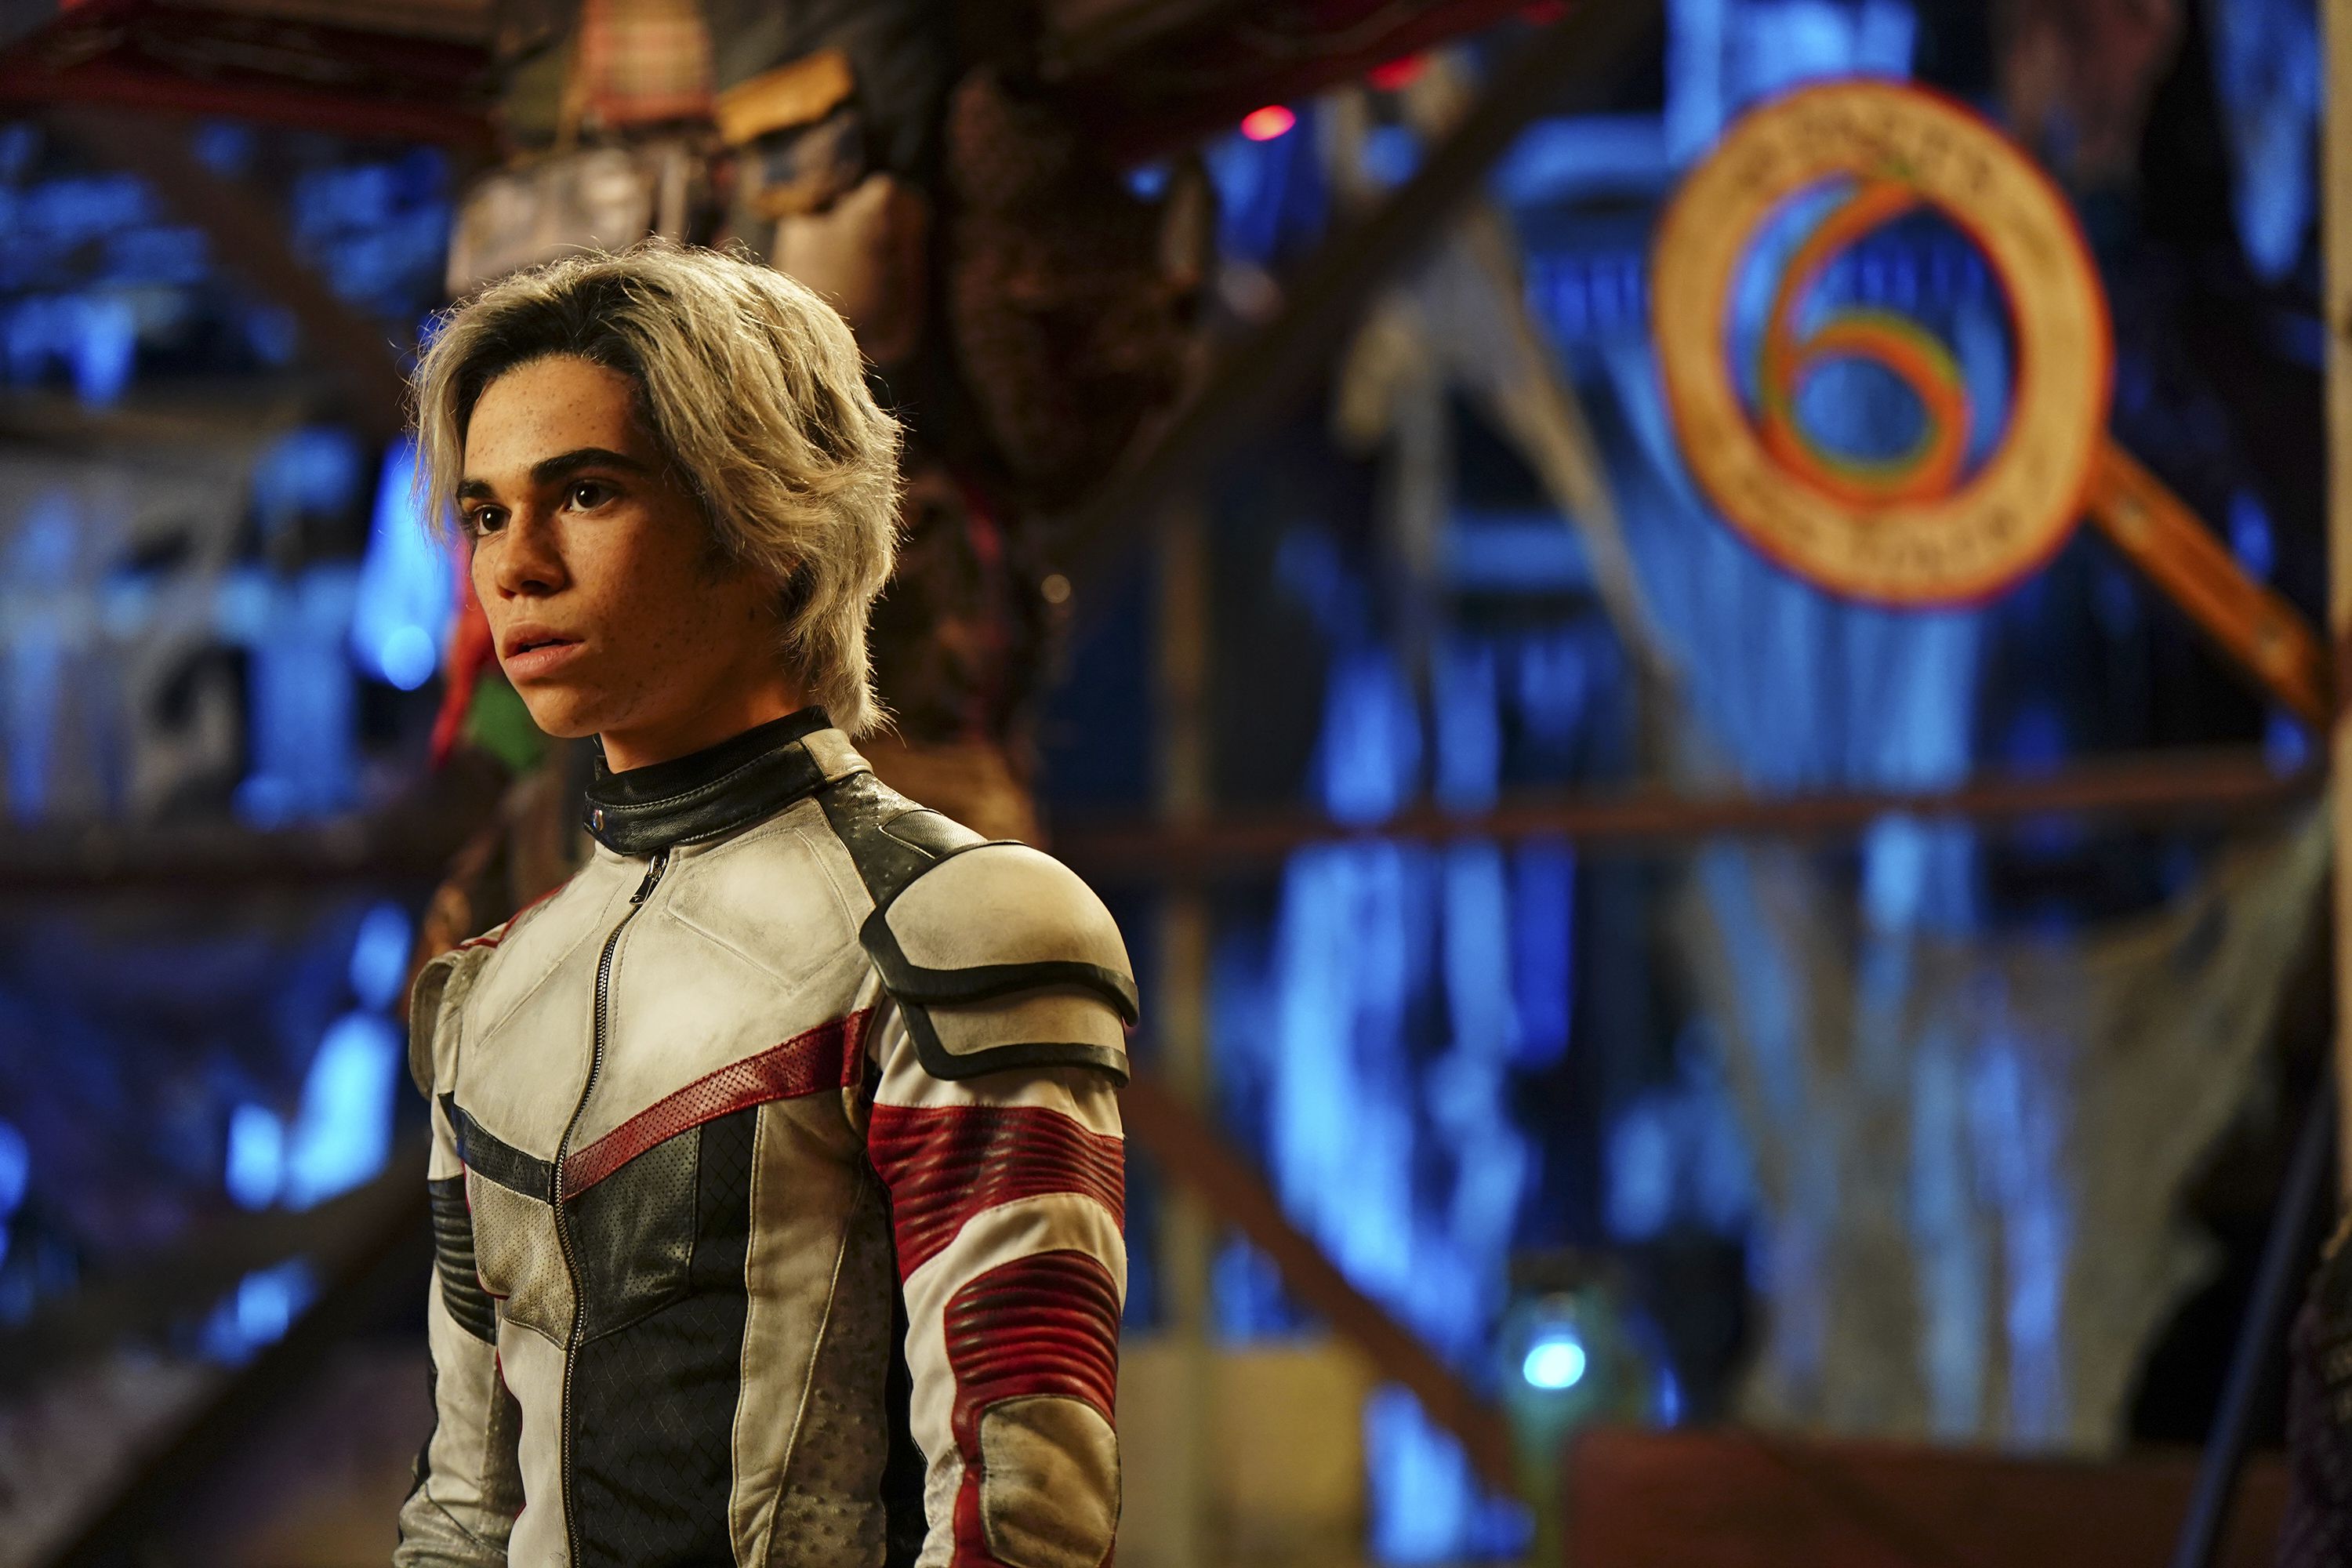 How Descendants 3's Core 4 Have Evolved Over 3 Movies